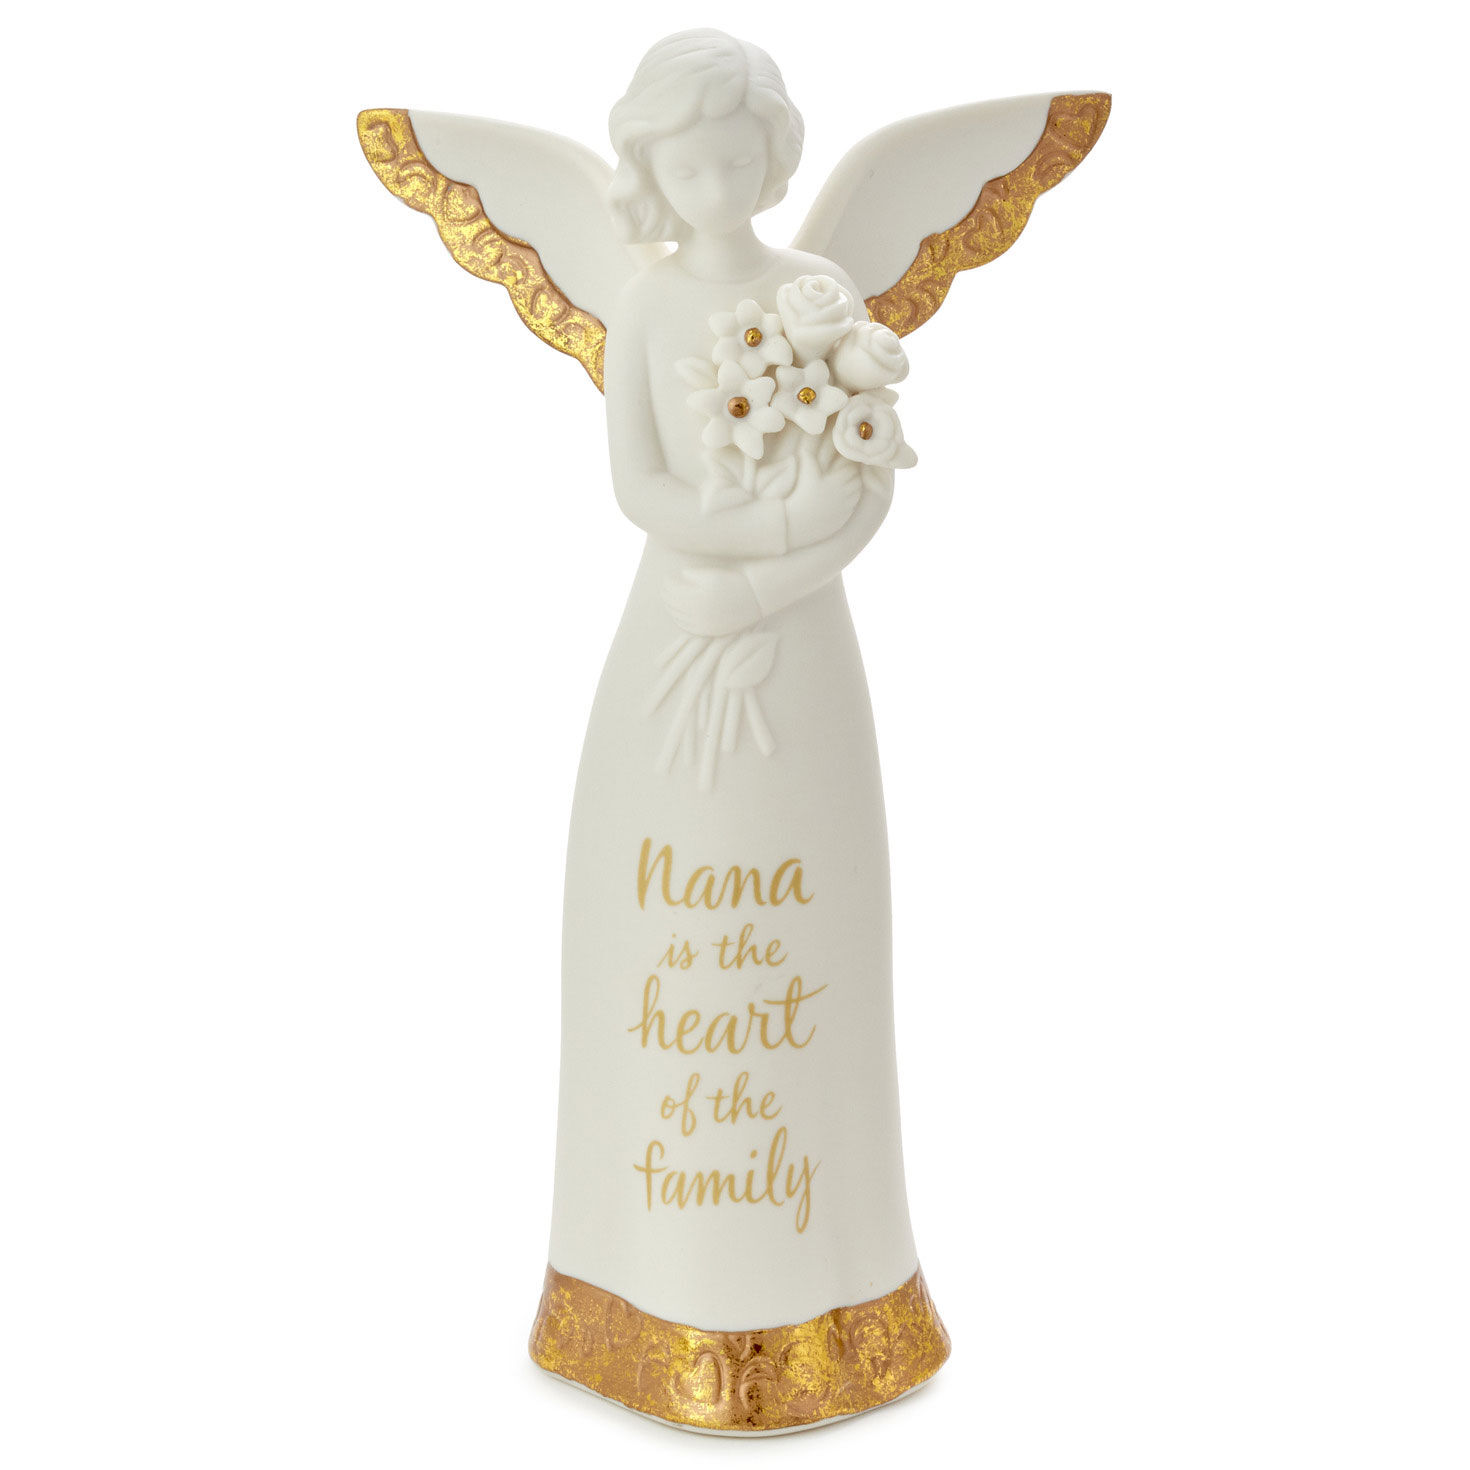 Heart of the Family Angel Figurine for Nana, 8.5" for only USD 29.99 | Hallmark